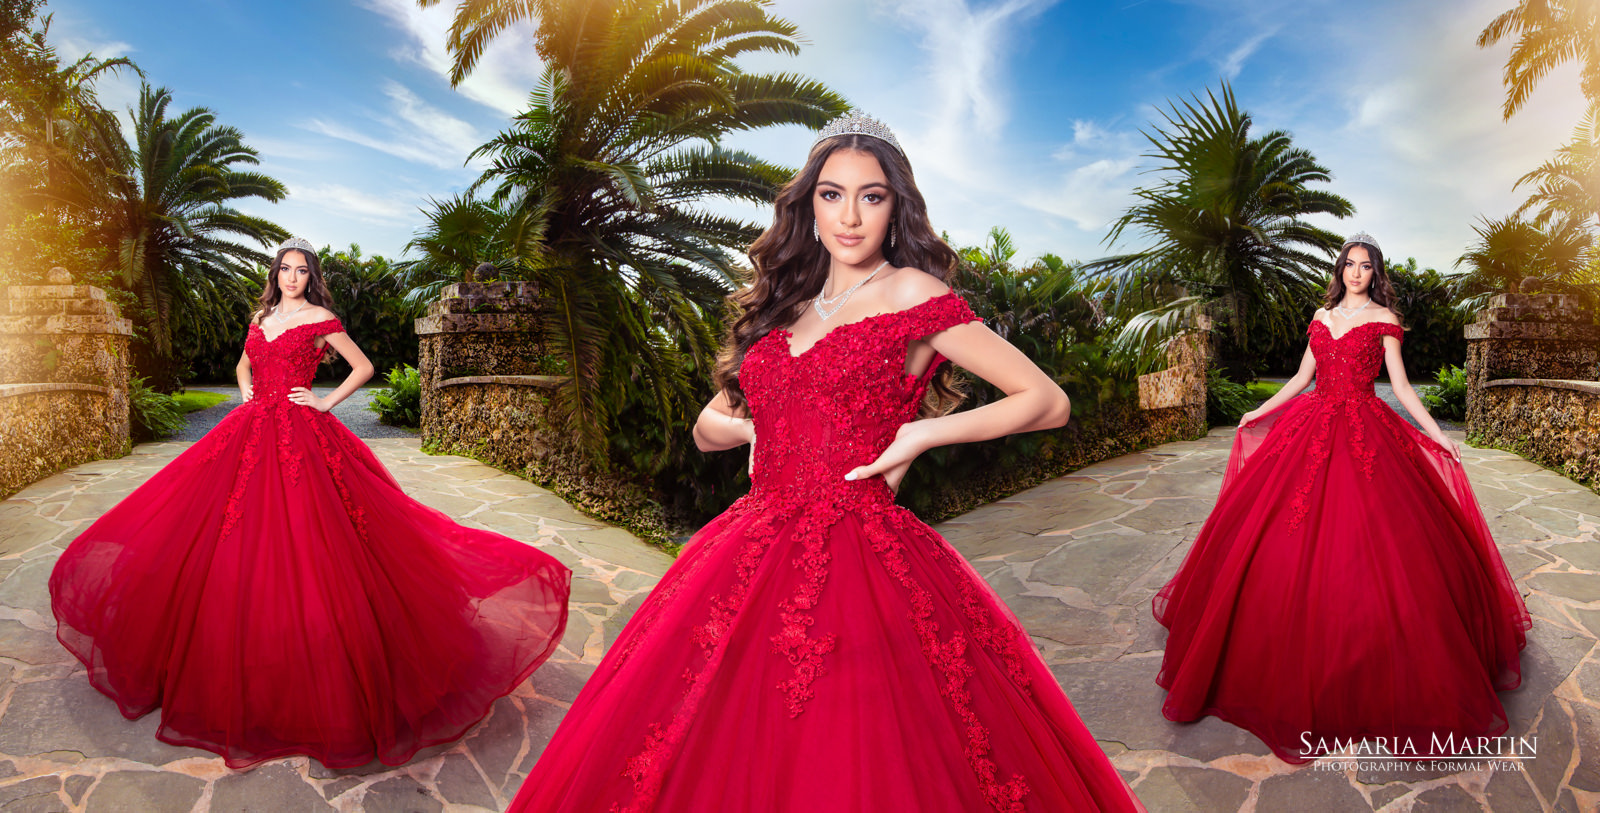 Ball Gown Images - Free Download on Freepik